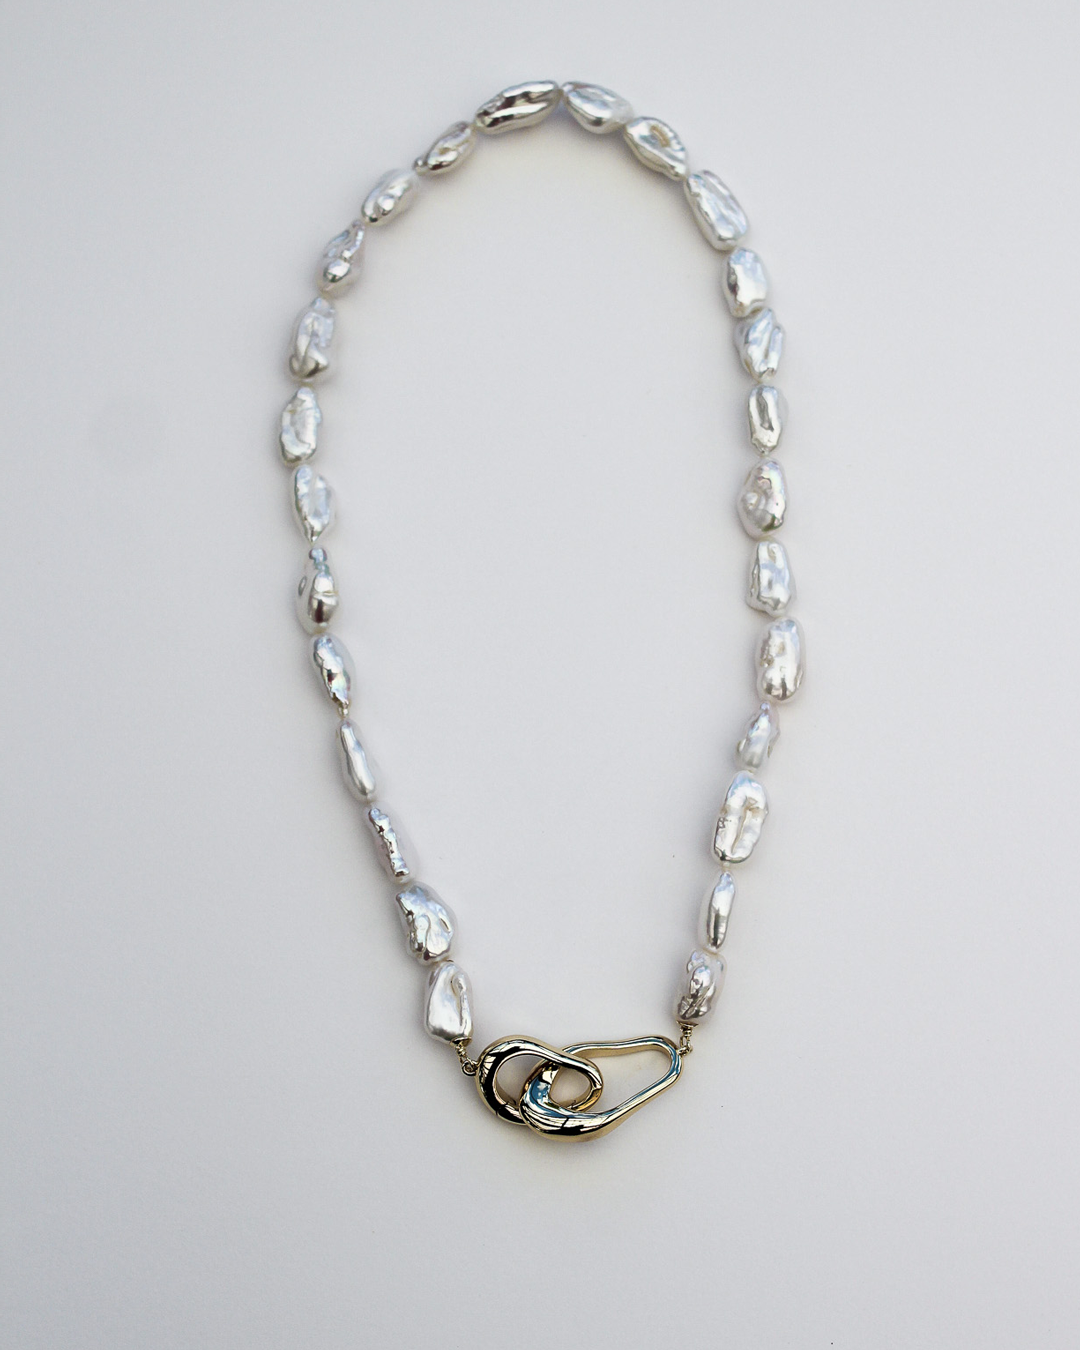 Foundation Pearl Necklace